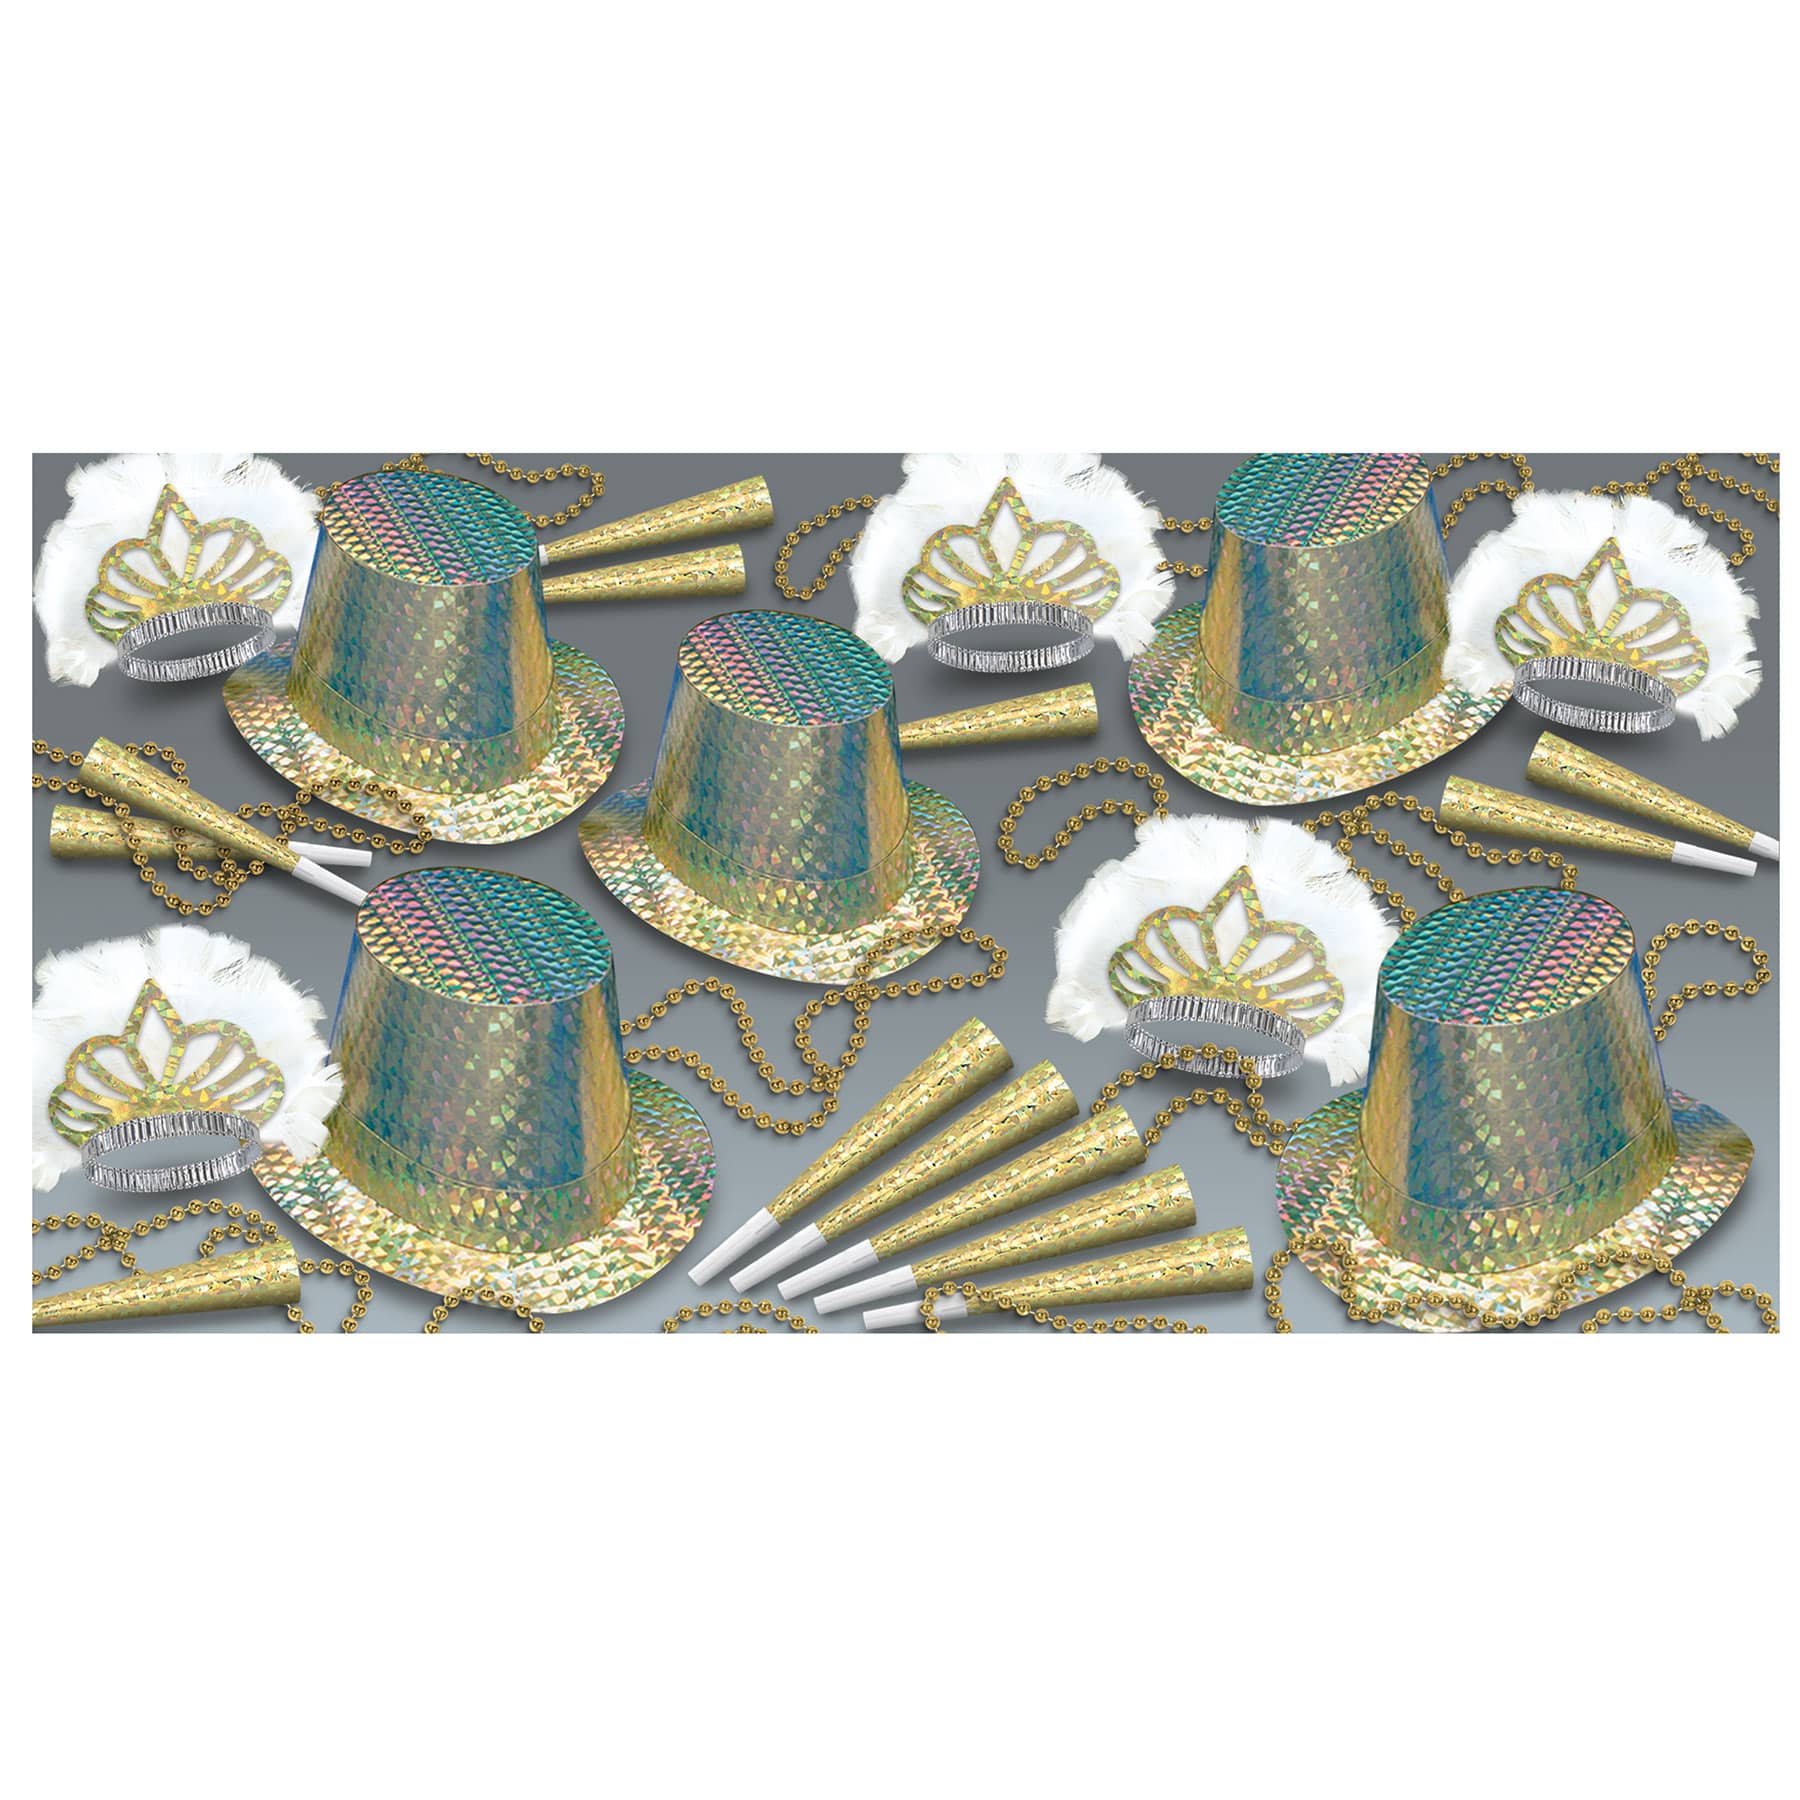 gold prismatic party hats in a party kit that has gold tiaras with white feathers, prismatic horns, and party beads